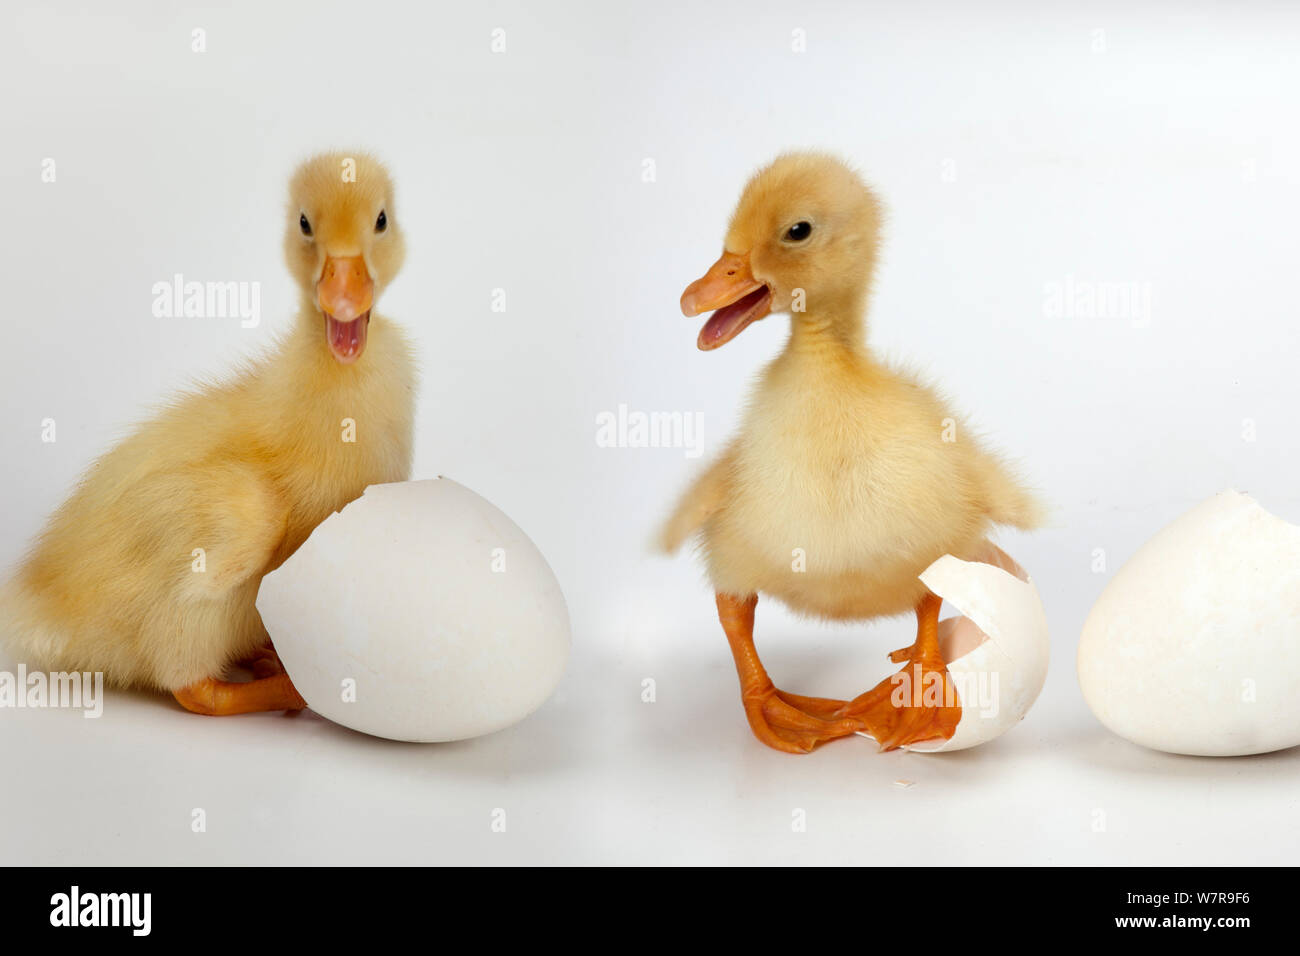 Newly hatched ducklings with eggs. Stock Photo